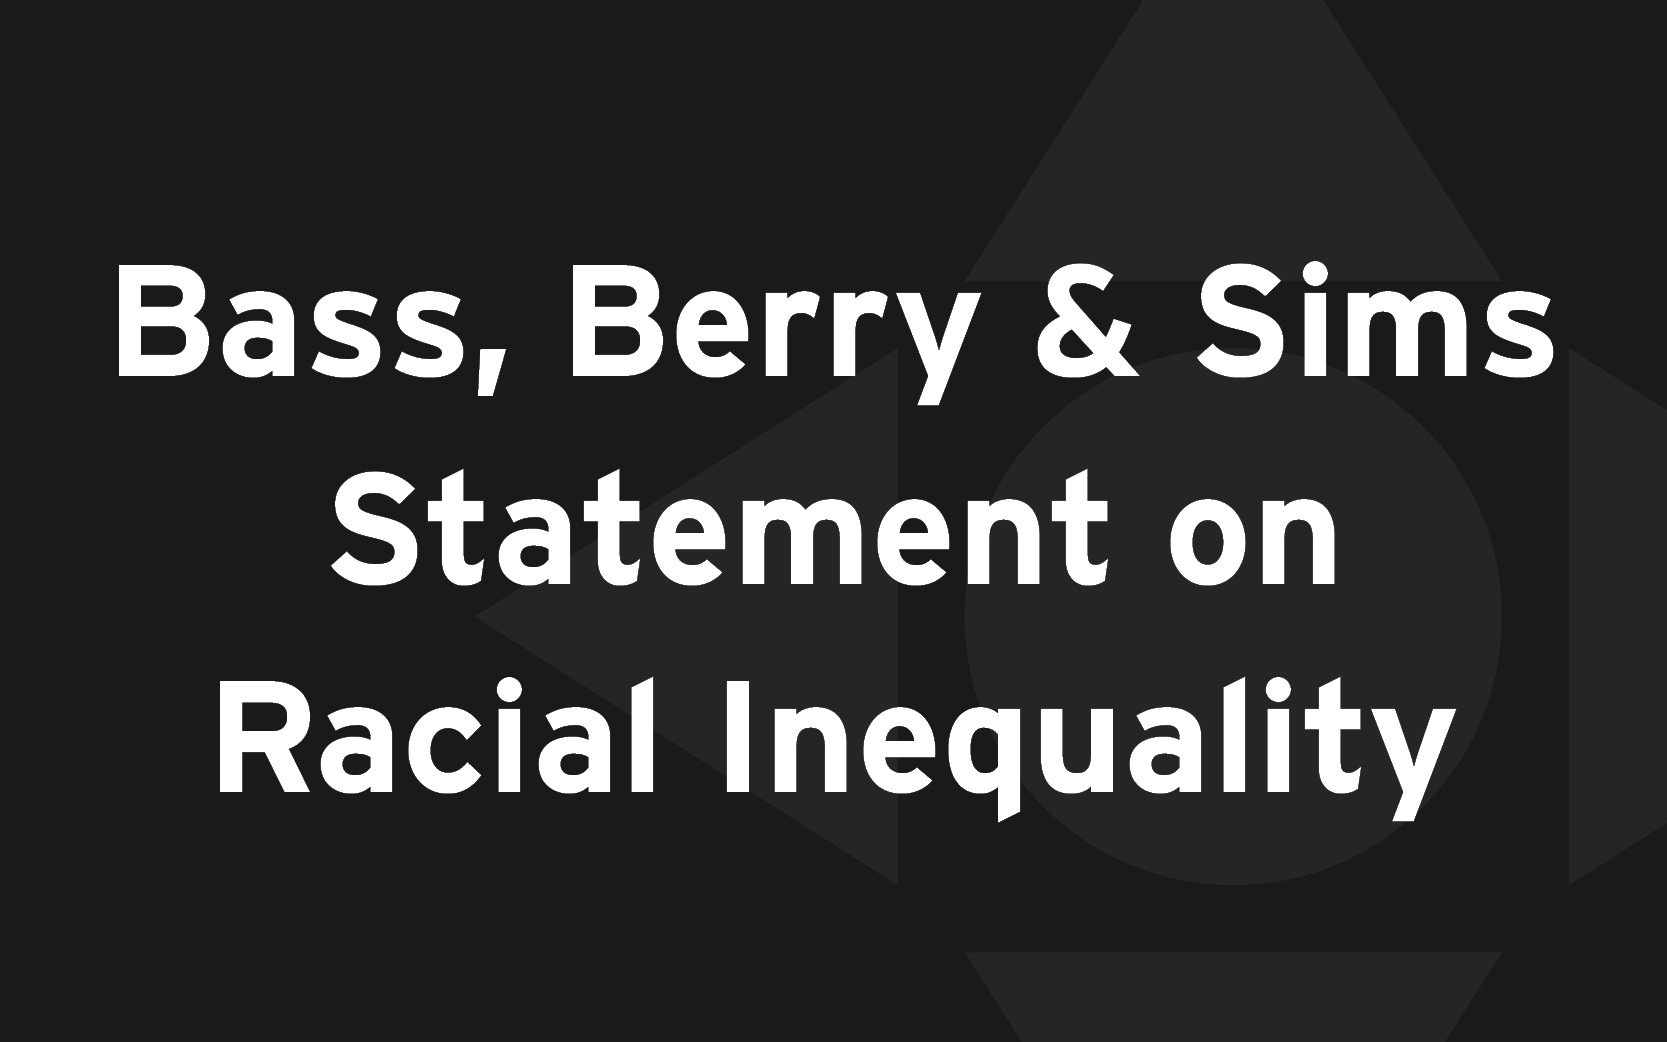 Bass, Berry & Sims Statement on Racial Inequality